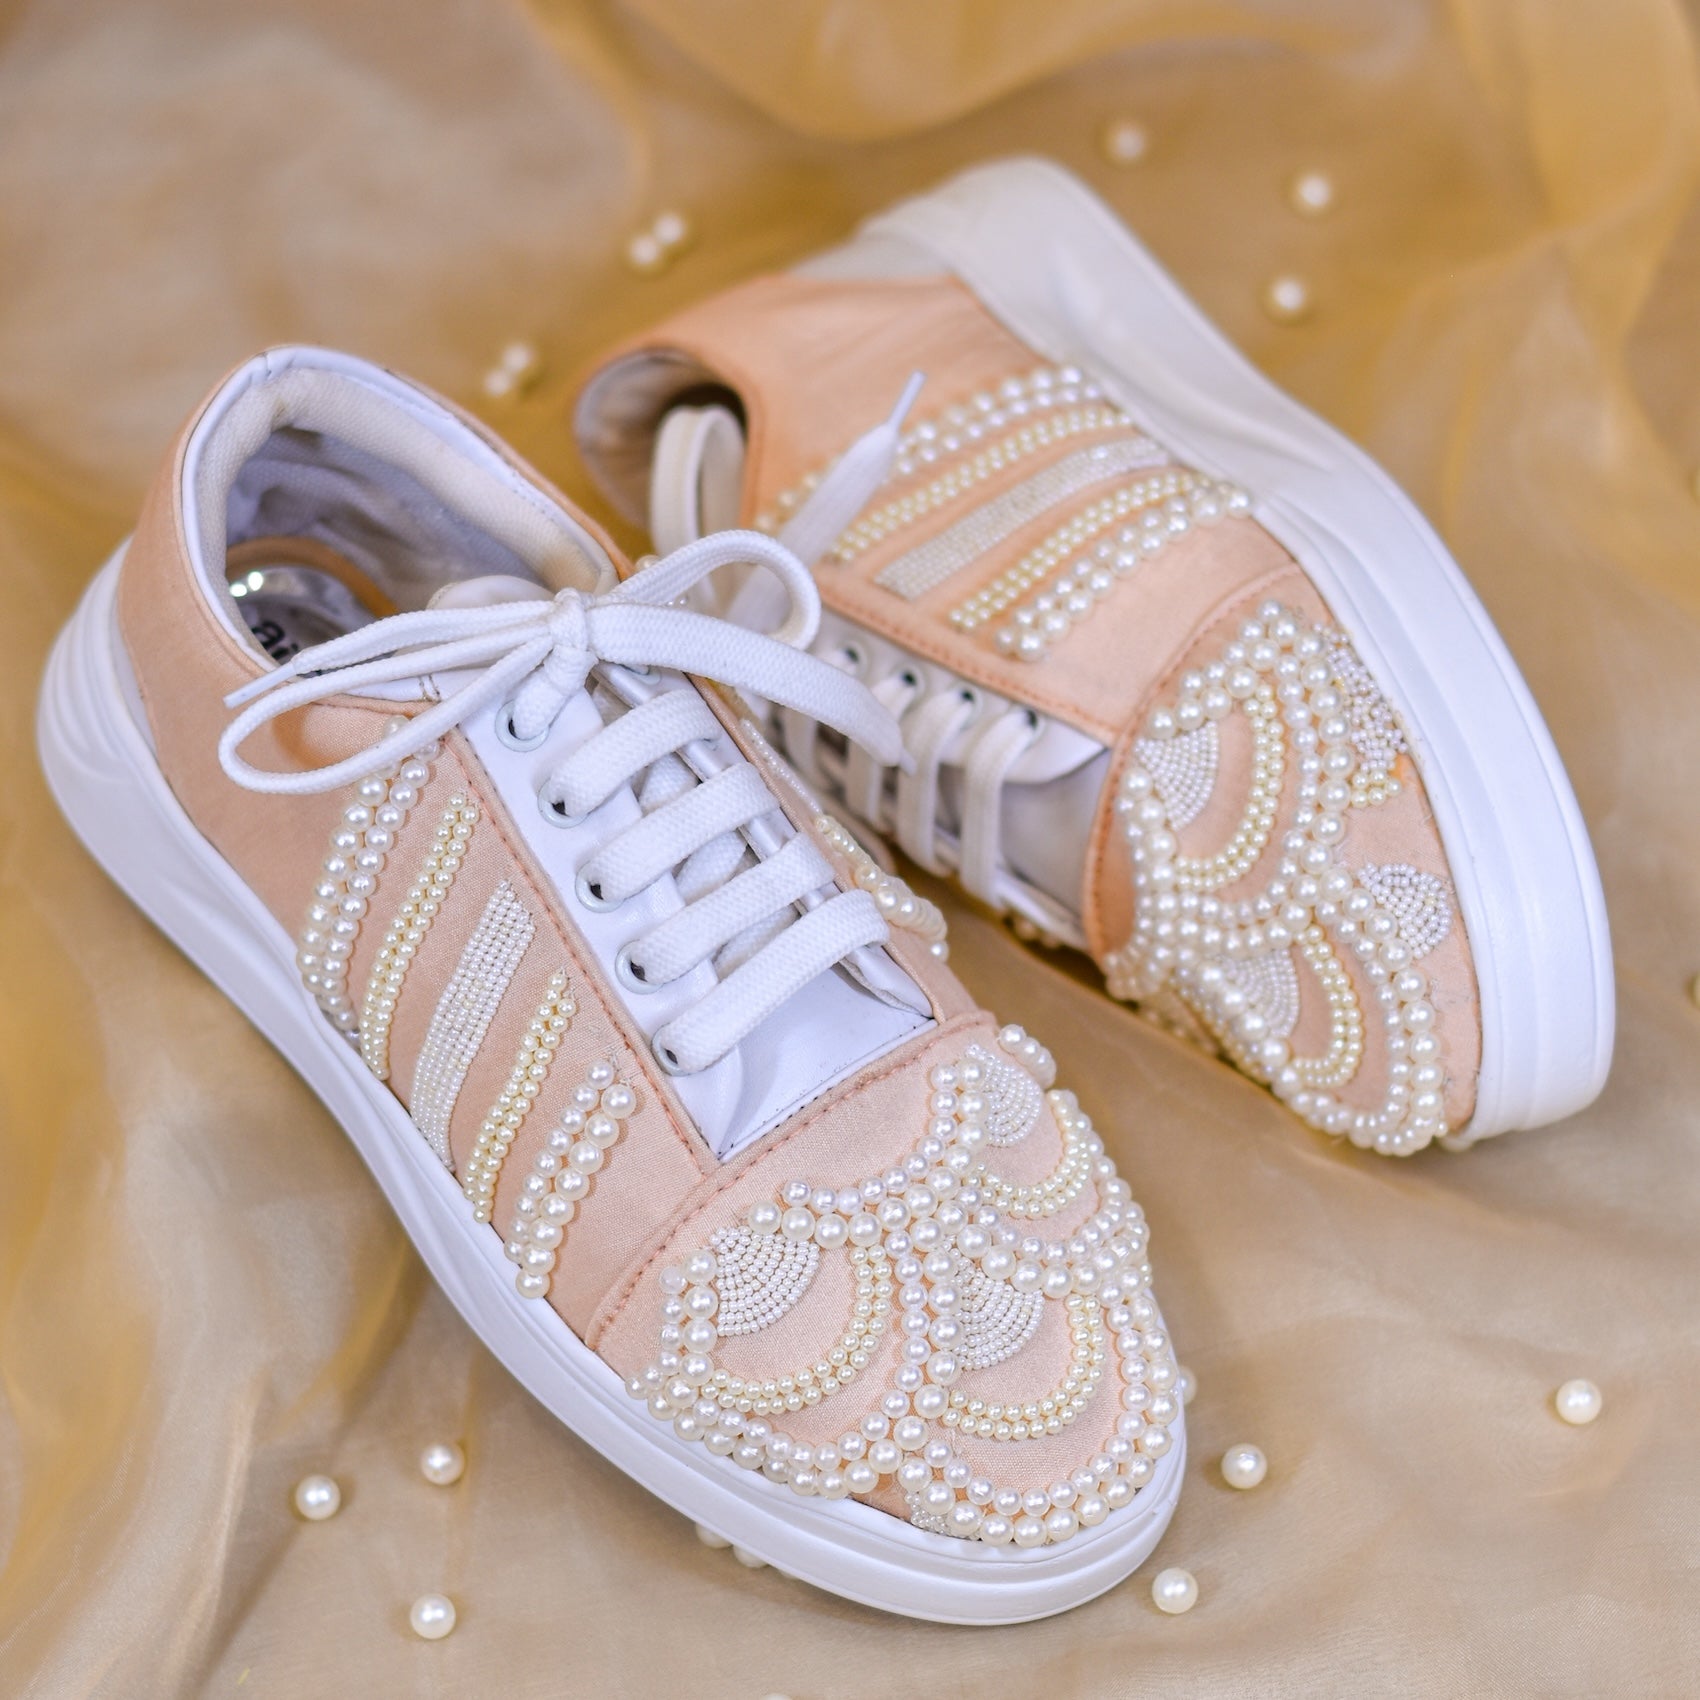 Wedding Sneakers for a comfortable sangeet for bride to be